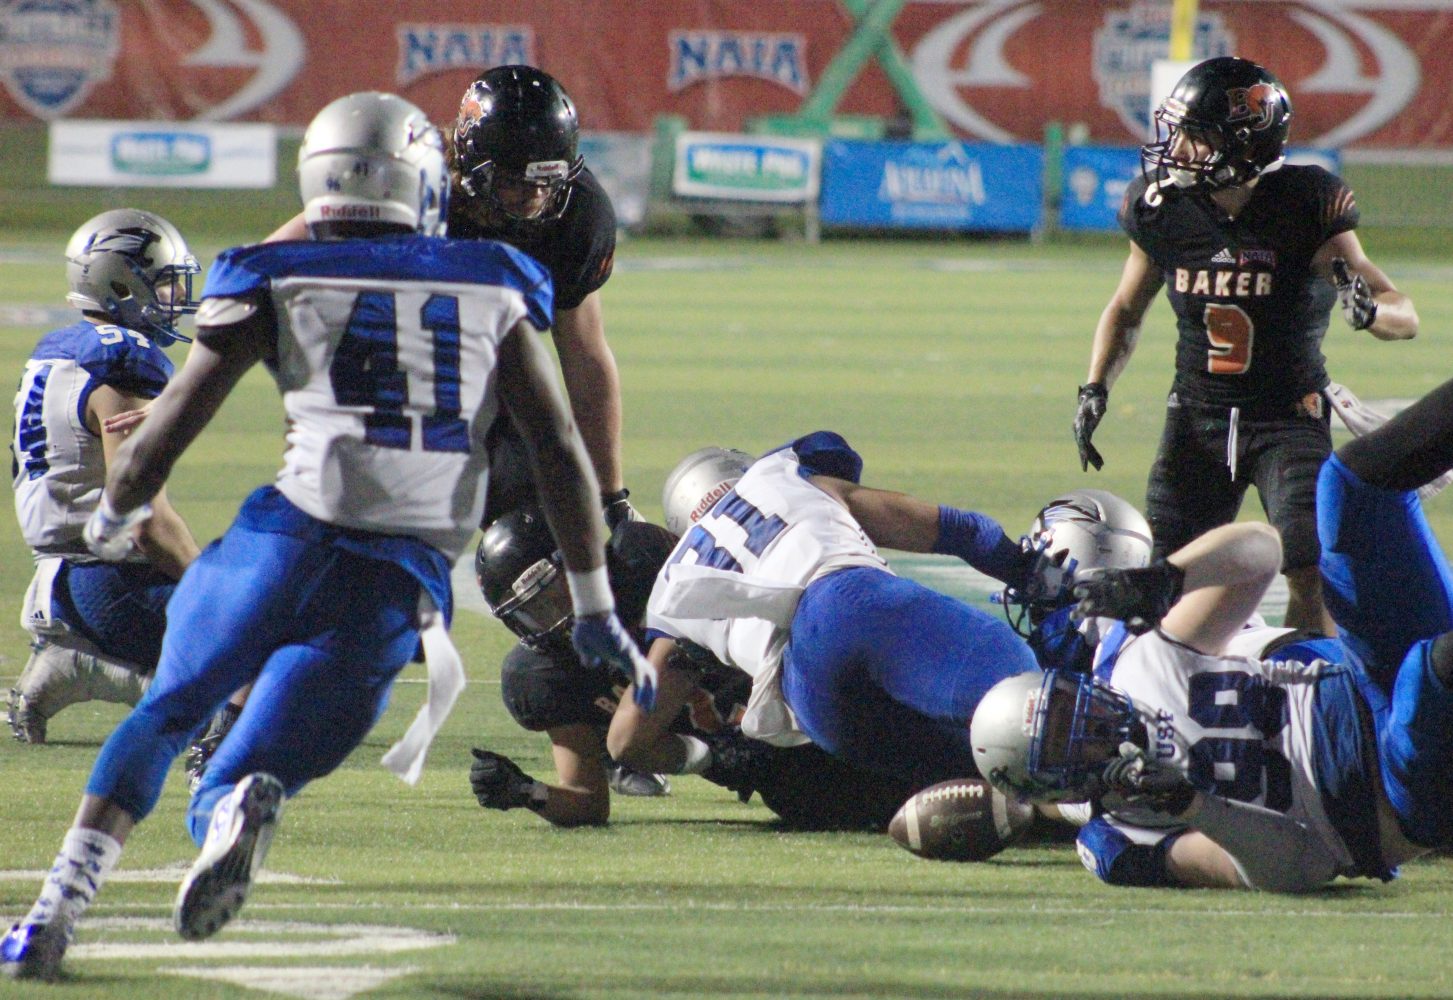 Saint Francis forces a Cornell Brown fumble in the fourth quarter of the national title game in Daytona Beach, Florida. The Cougars forced two Baker turnovers in their 38-17 win. Image by Shelby Stephens.